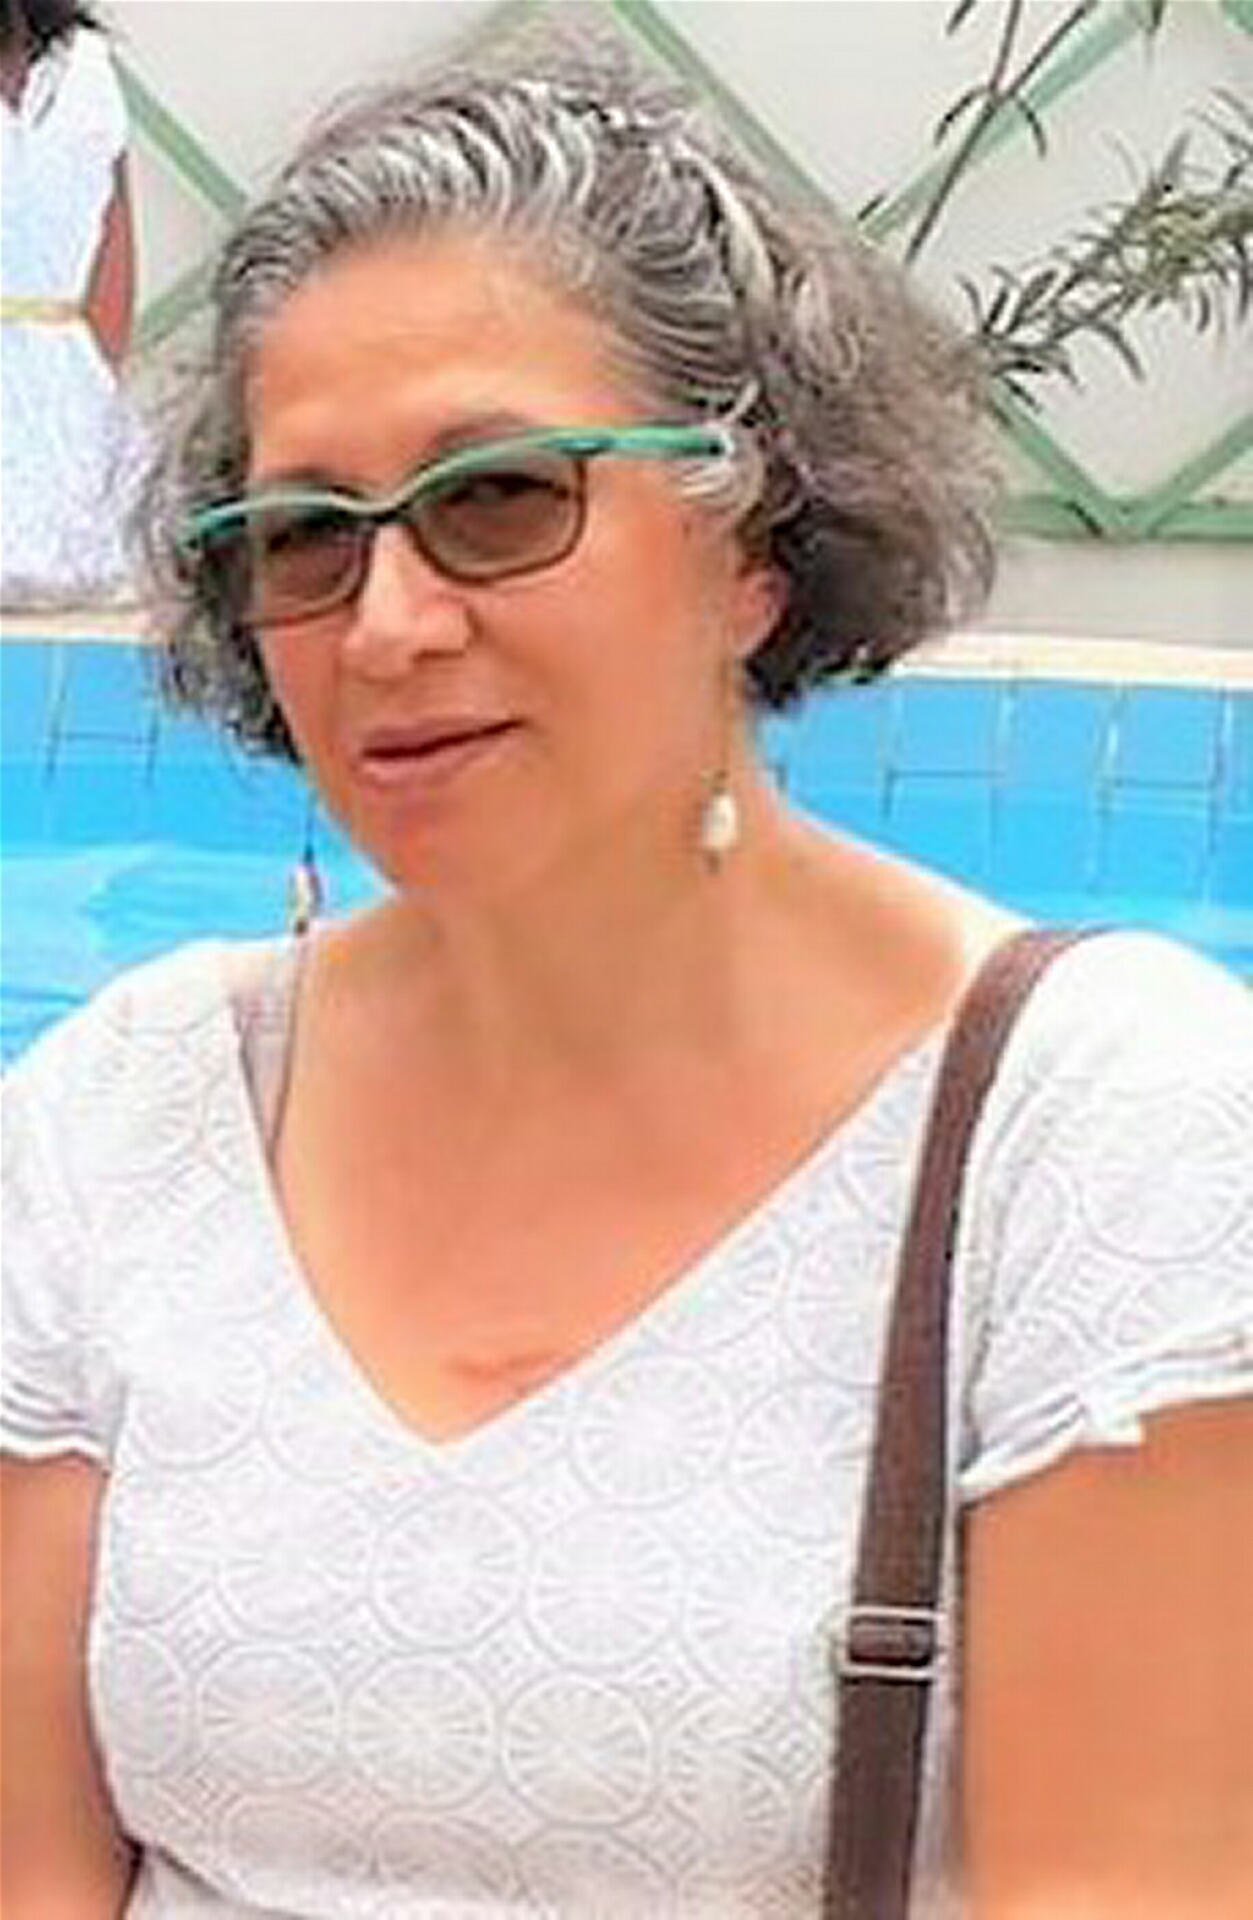 WOMAN WITH GREY HAIR POSING FOR PICTURE